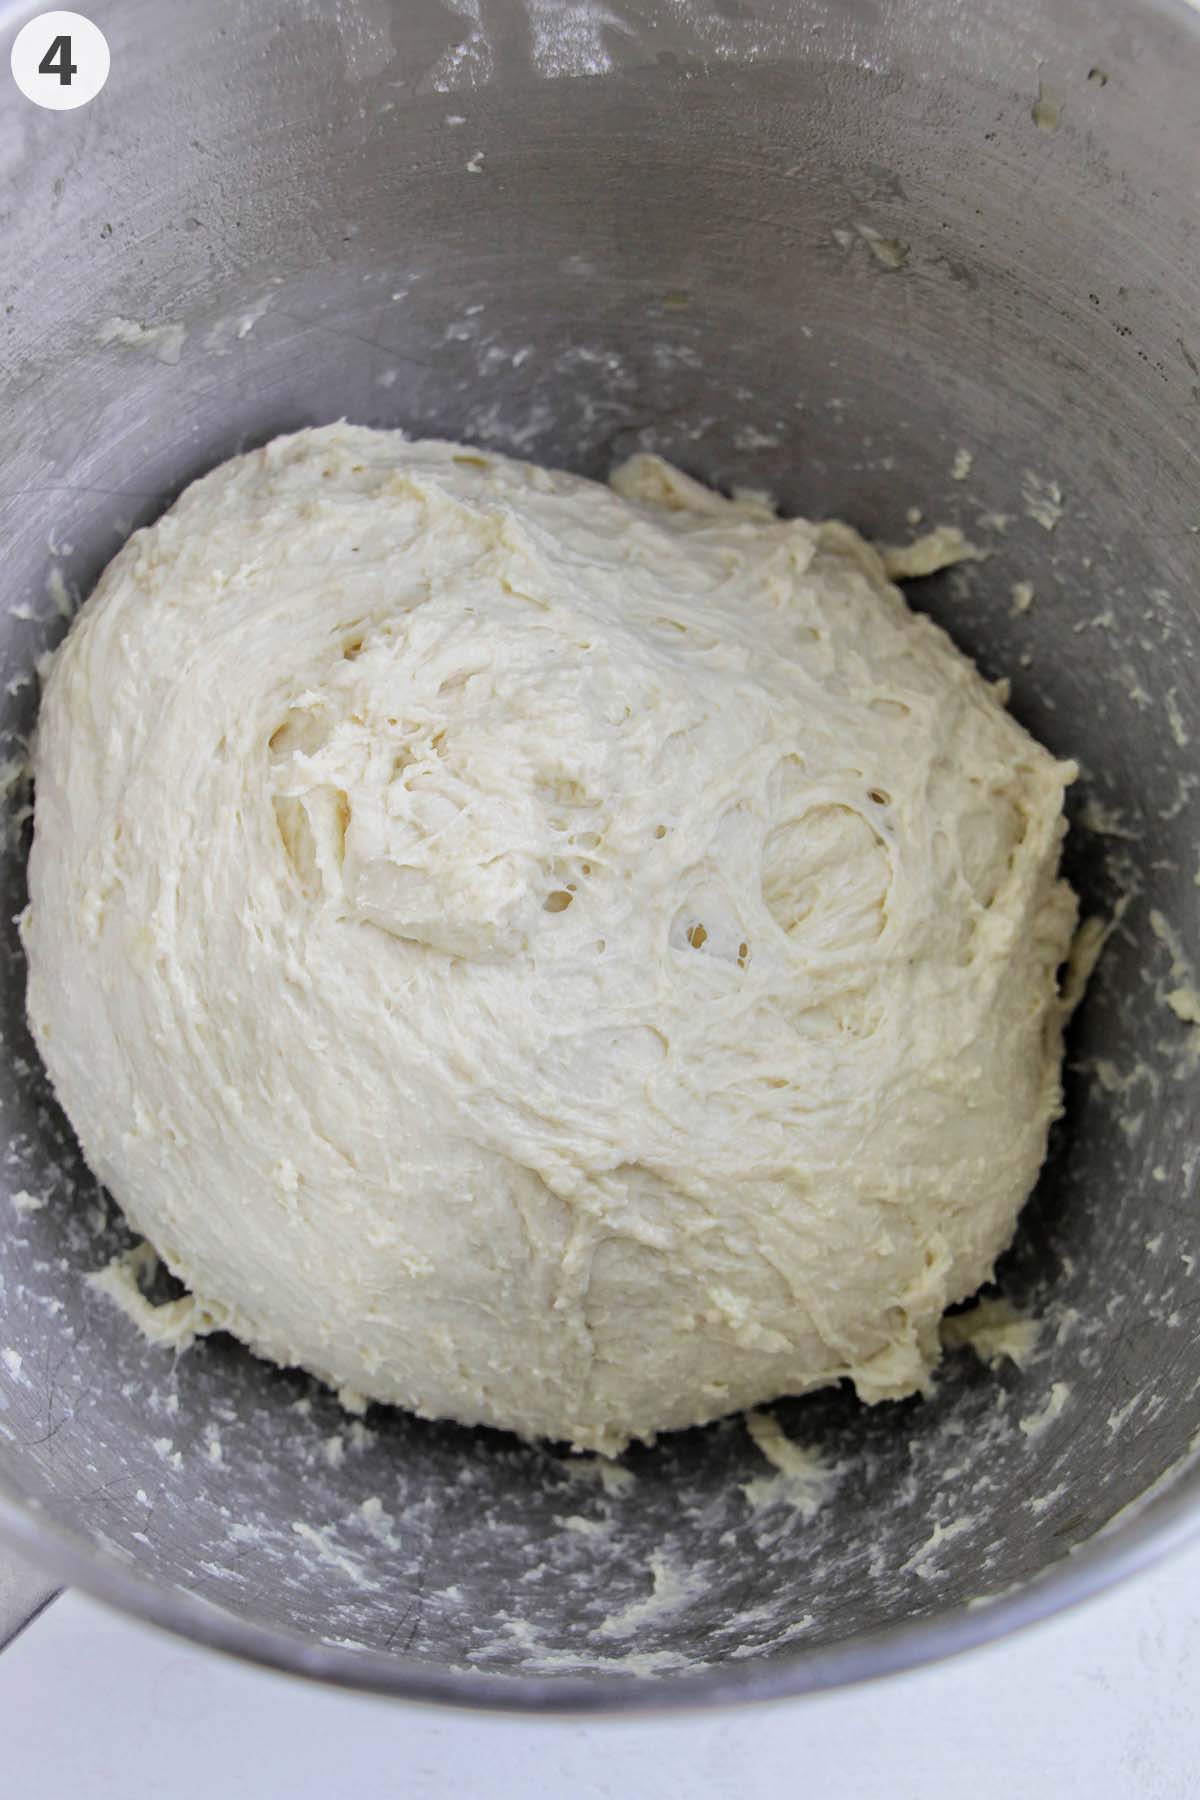 numbered photo showing focaccia dough in mixing bowl.